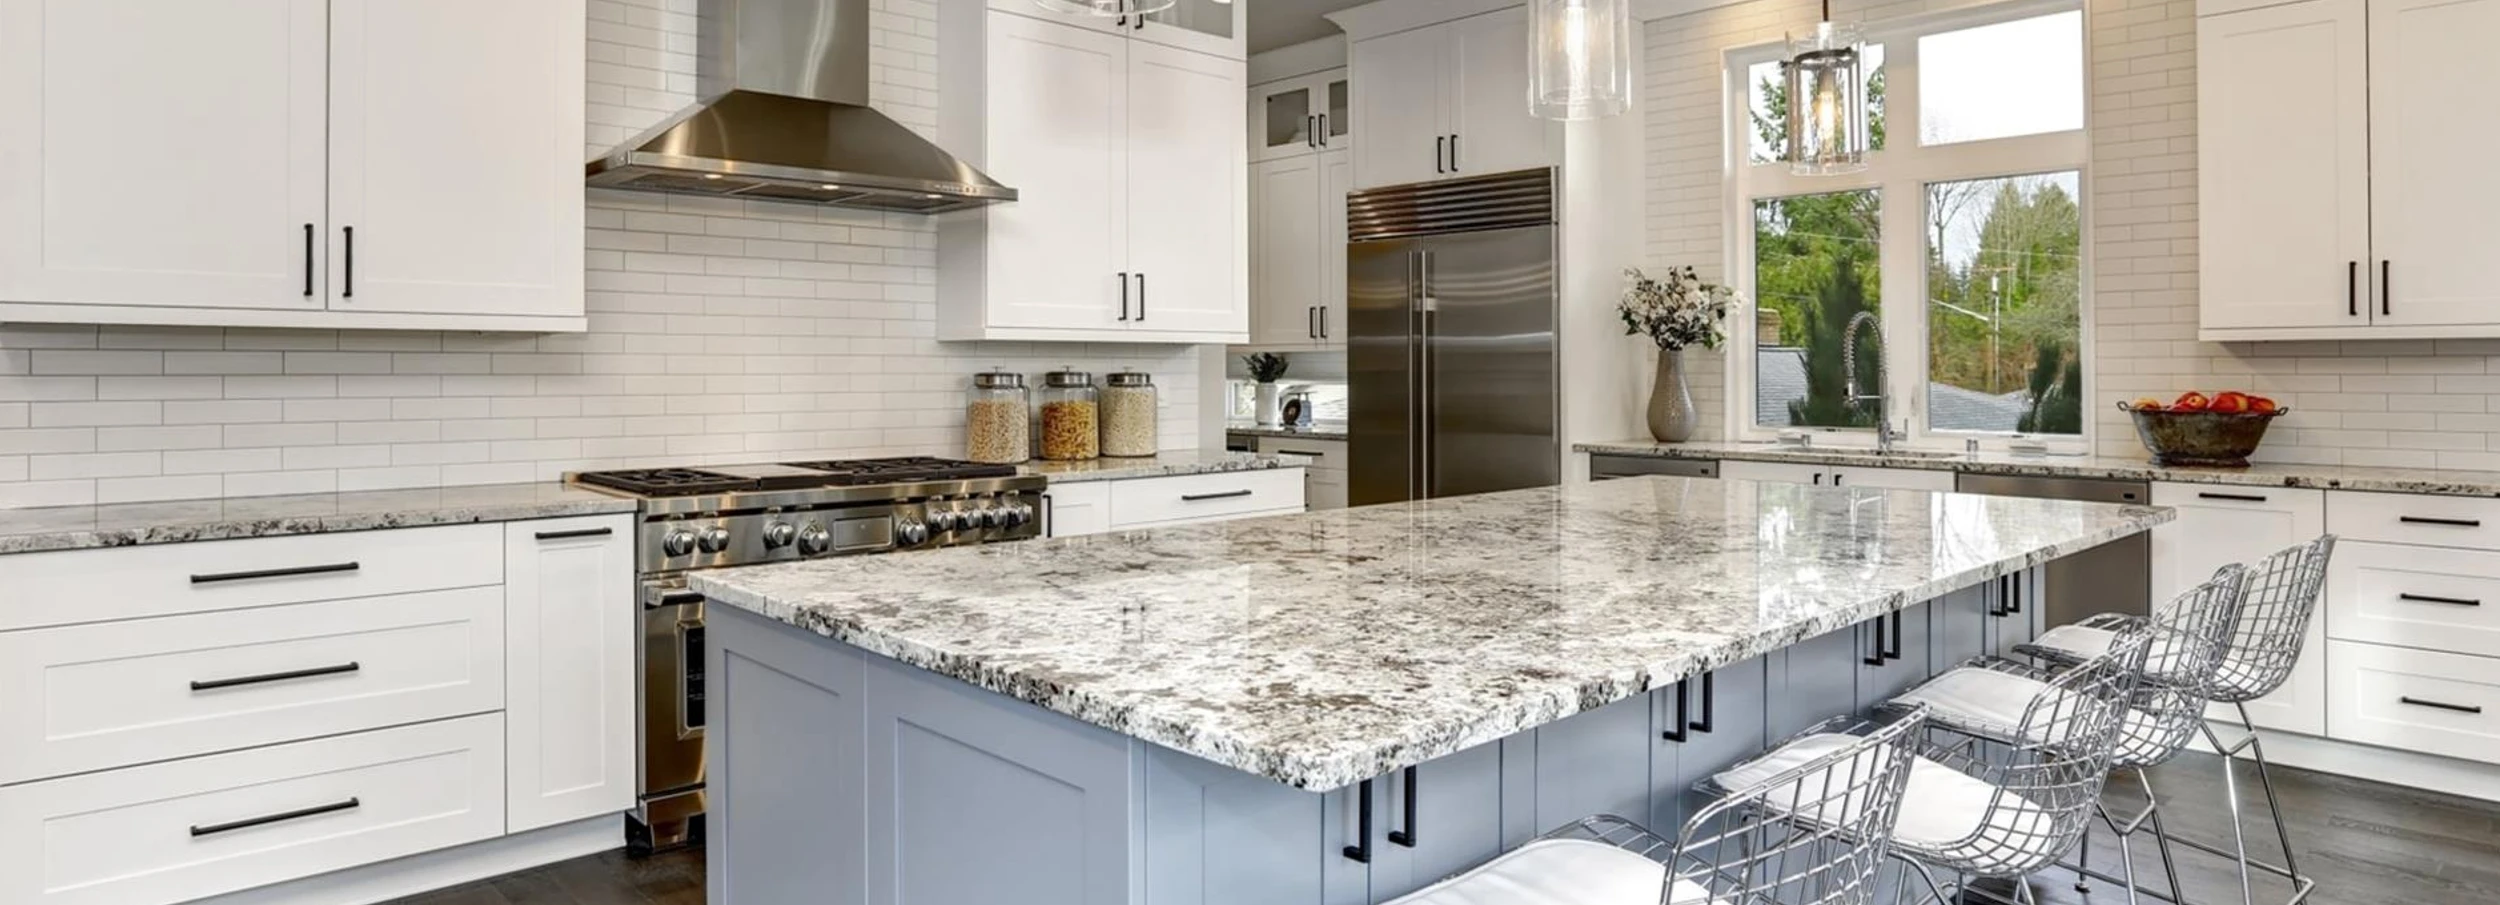 Marble top kitchen island in large, bright modern kitchen with white cabinets and dark hardwood floor.